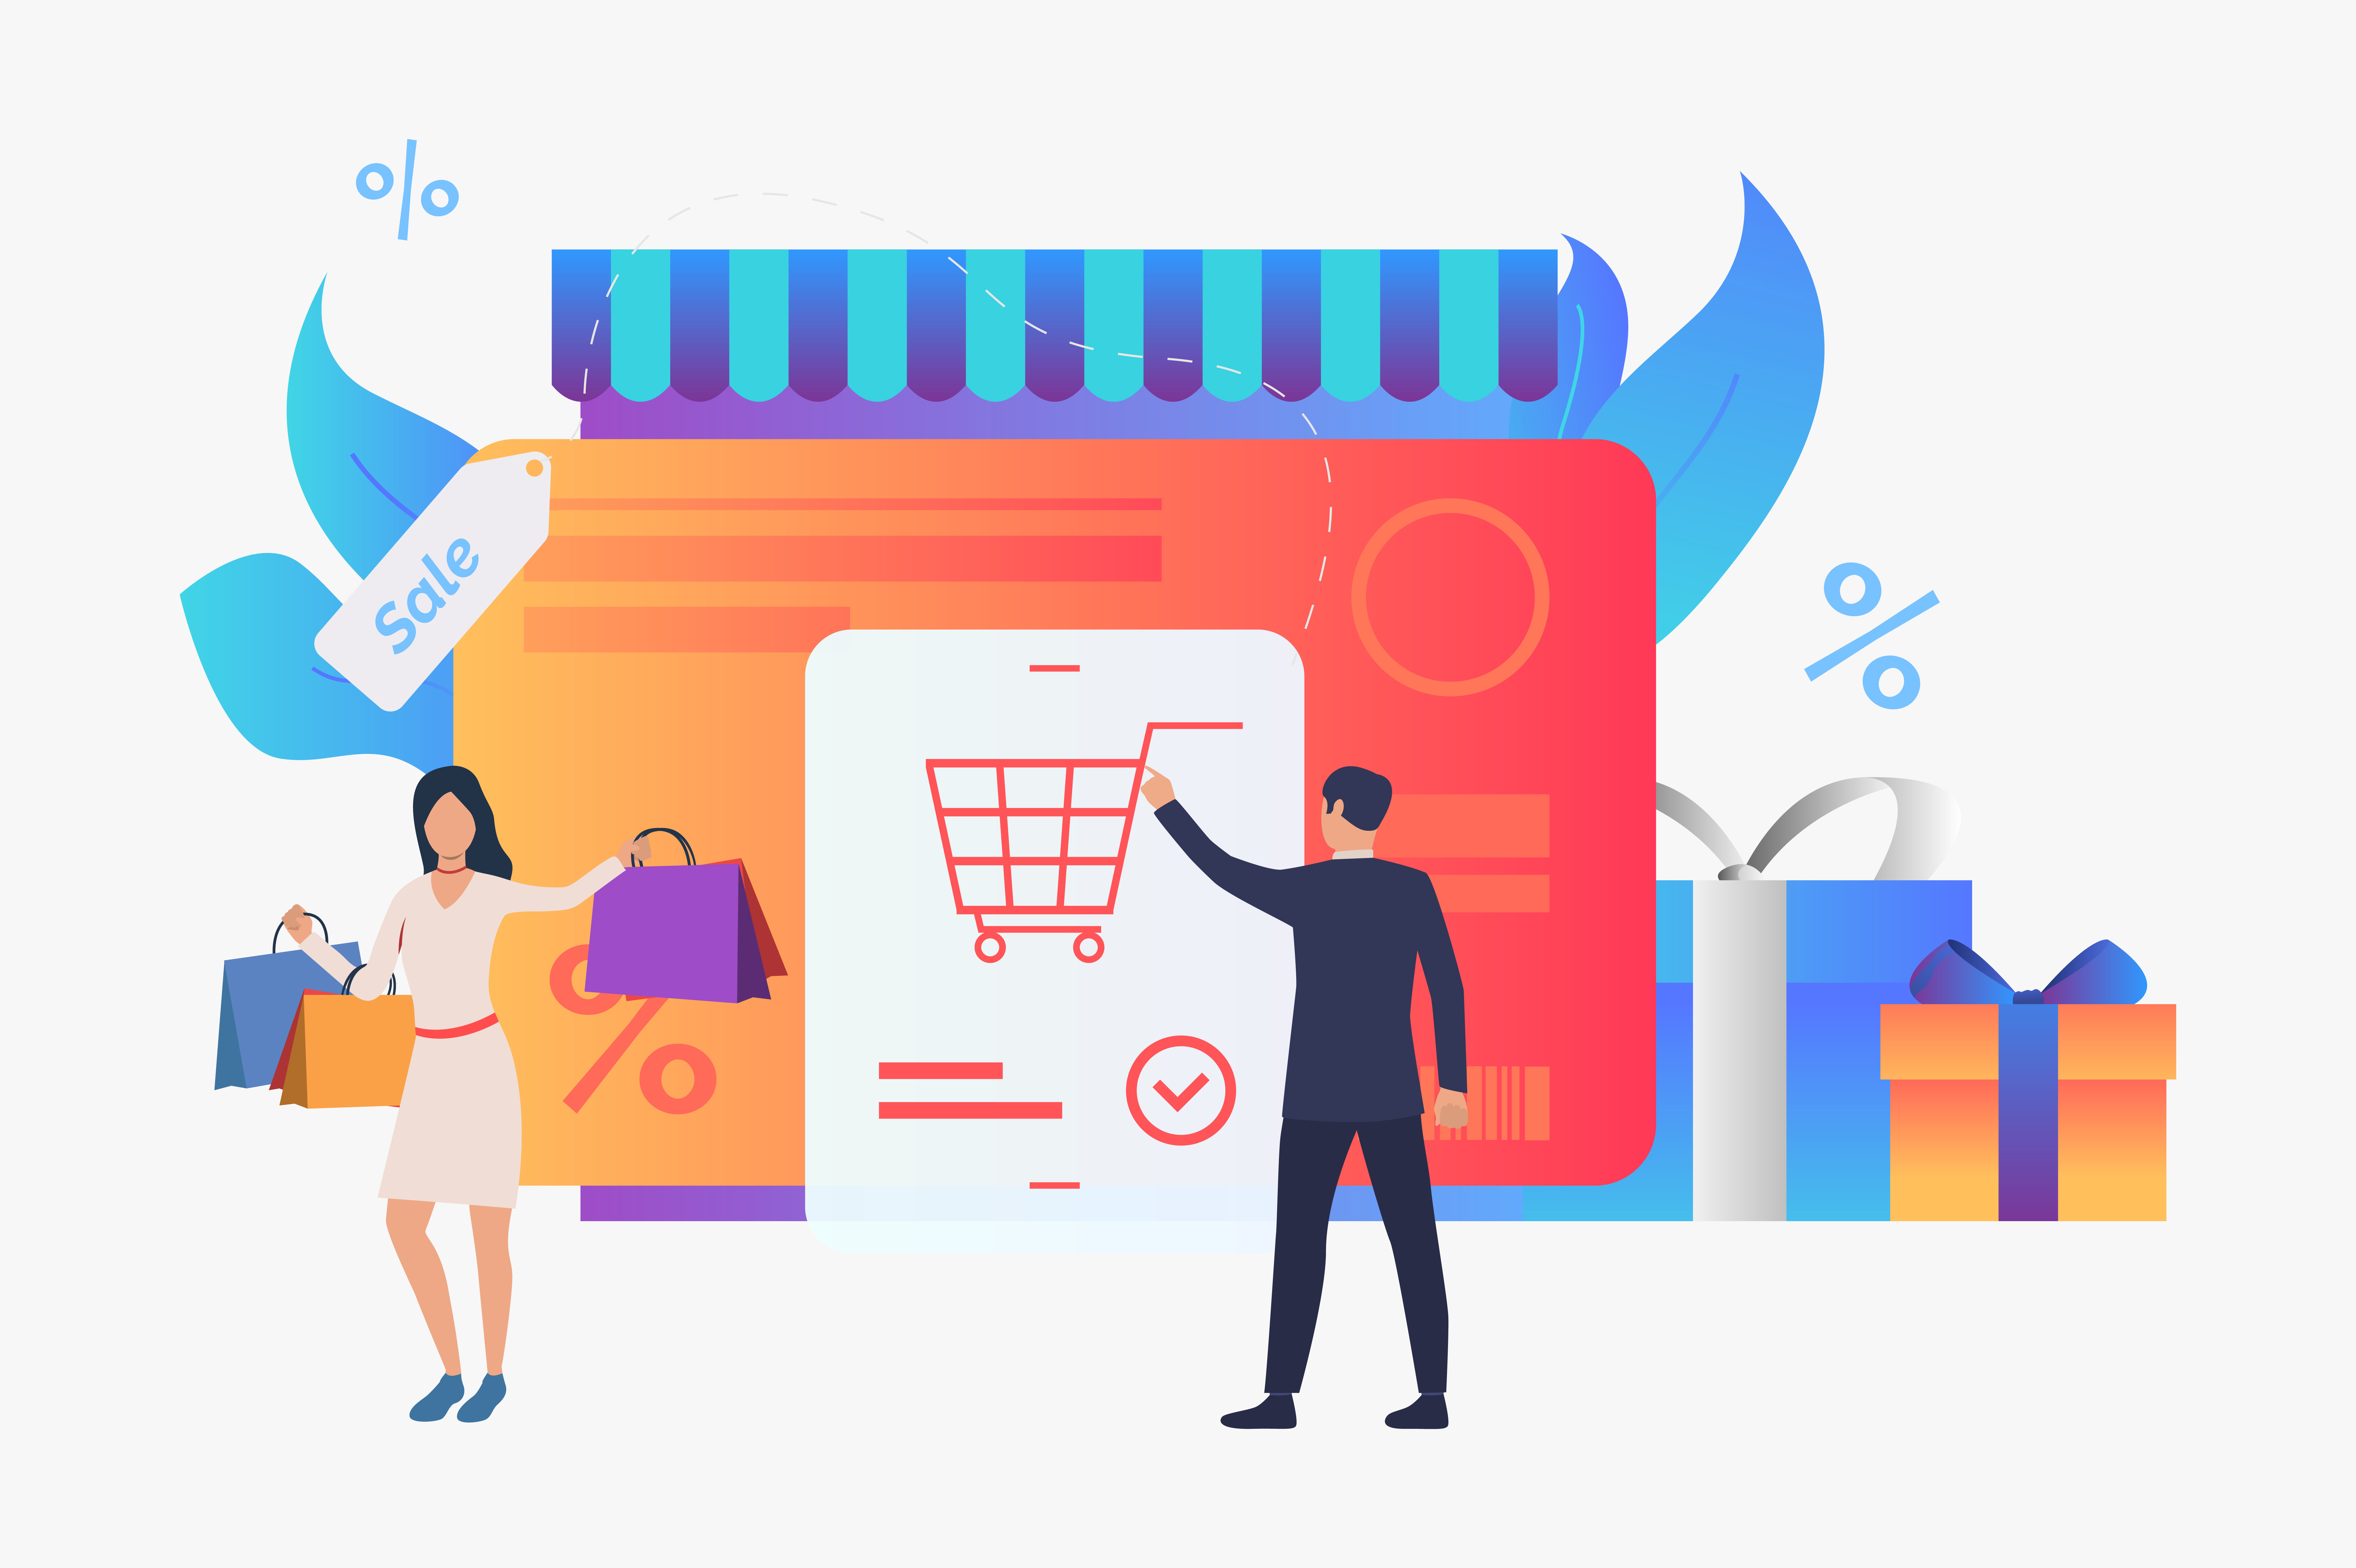 E-commerce marketplaces are targeting value-conscious customers to drive revenue growth in 2023